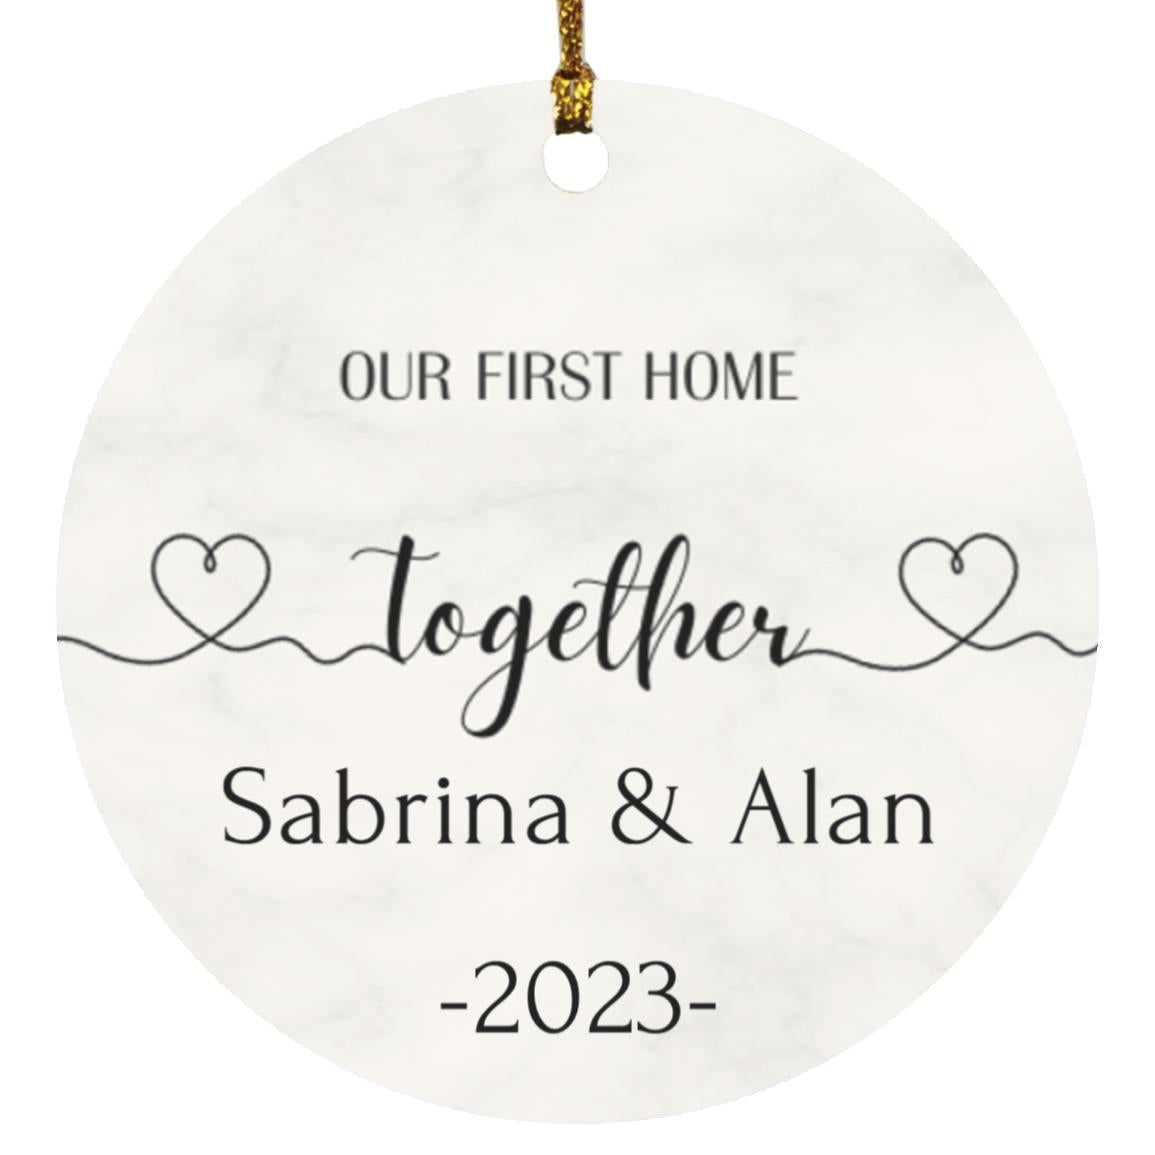 Our first home together Ornament, Custom Engagement Keepsake, Engagement Gift, Personalized First Home  Engaged, Engagement Announcemen